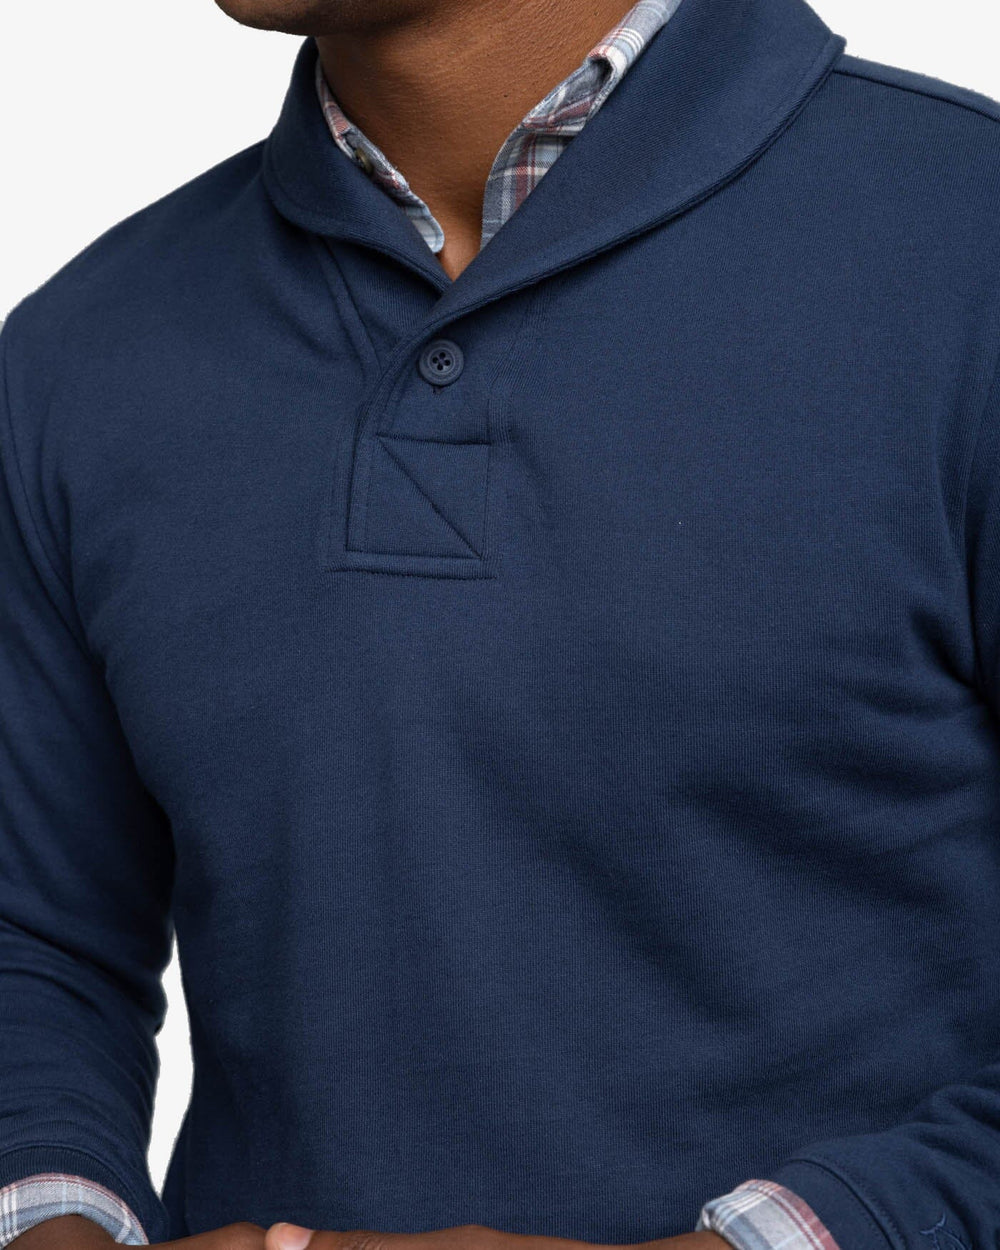 The detail view of the Southern Tide Stanley Pullover by Southern Tide - Dress Blue